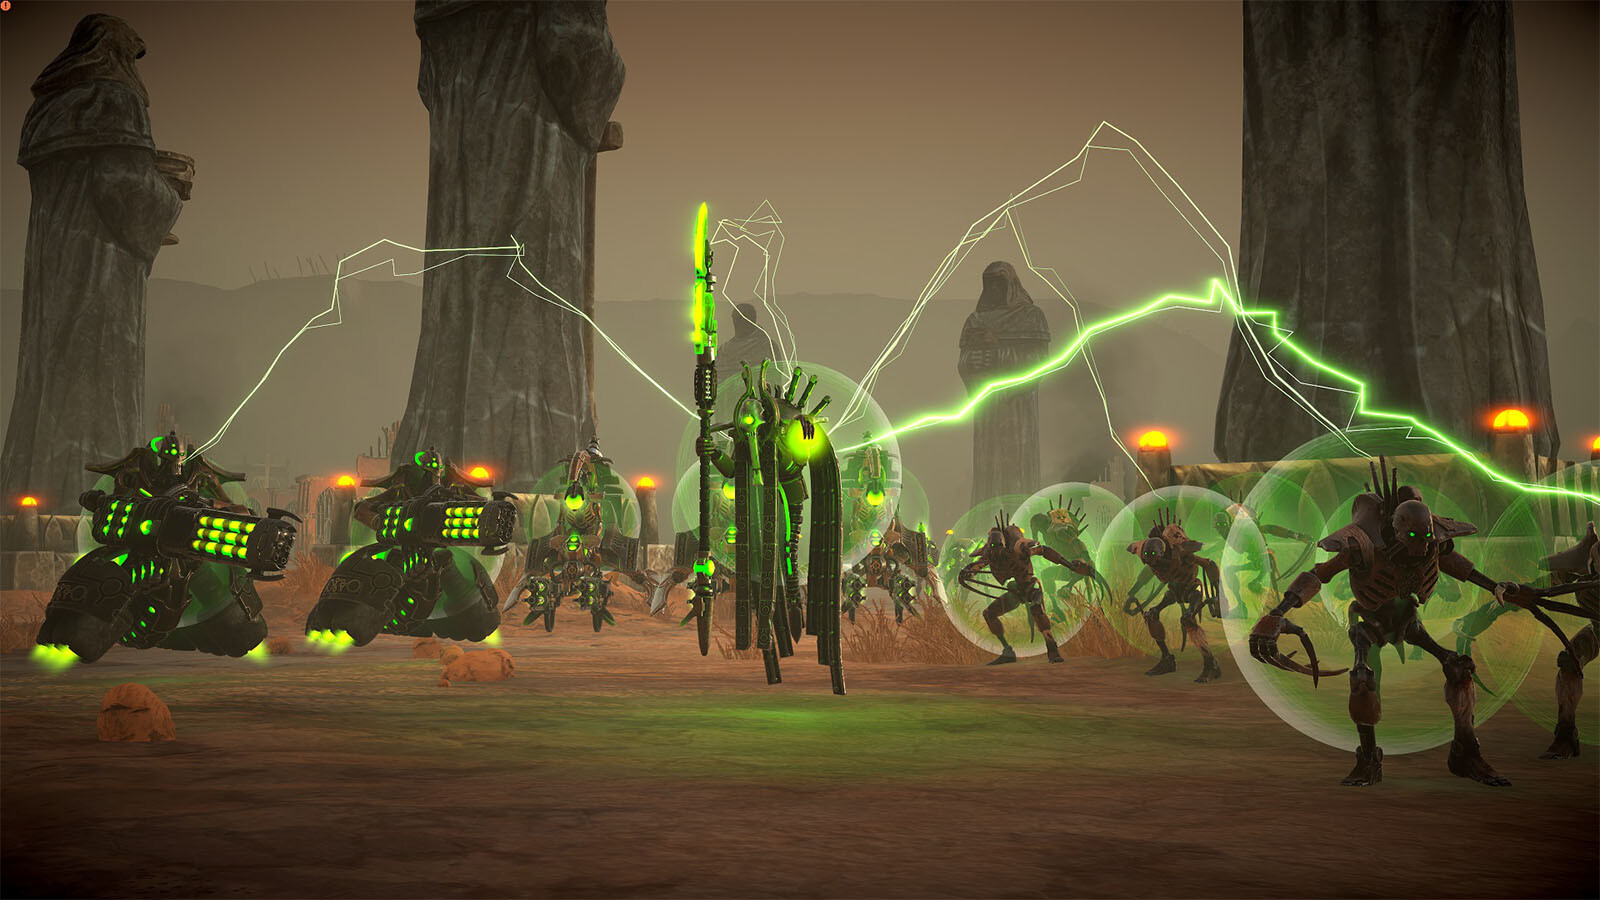 The Necrons are coming to Warhammer 40,000: Battlesector